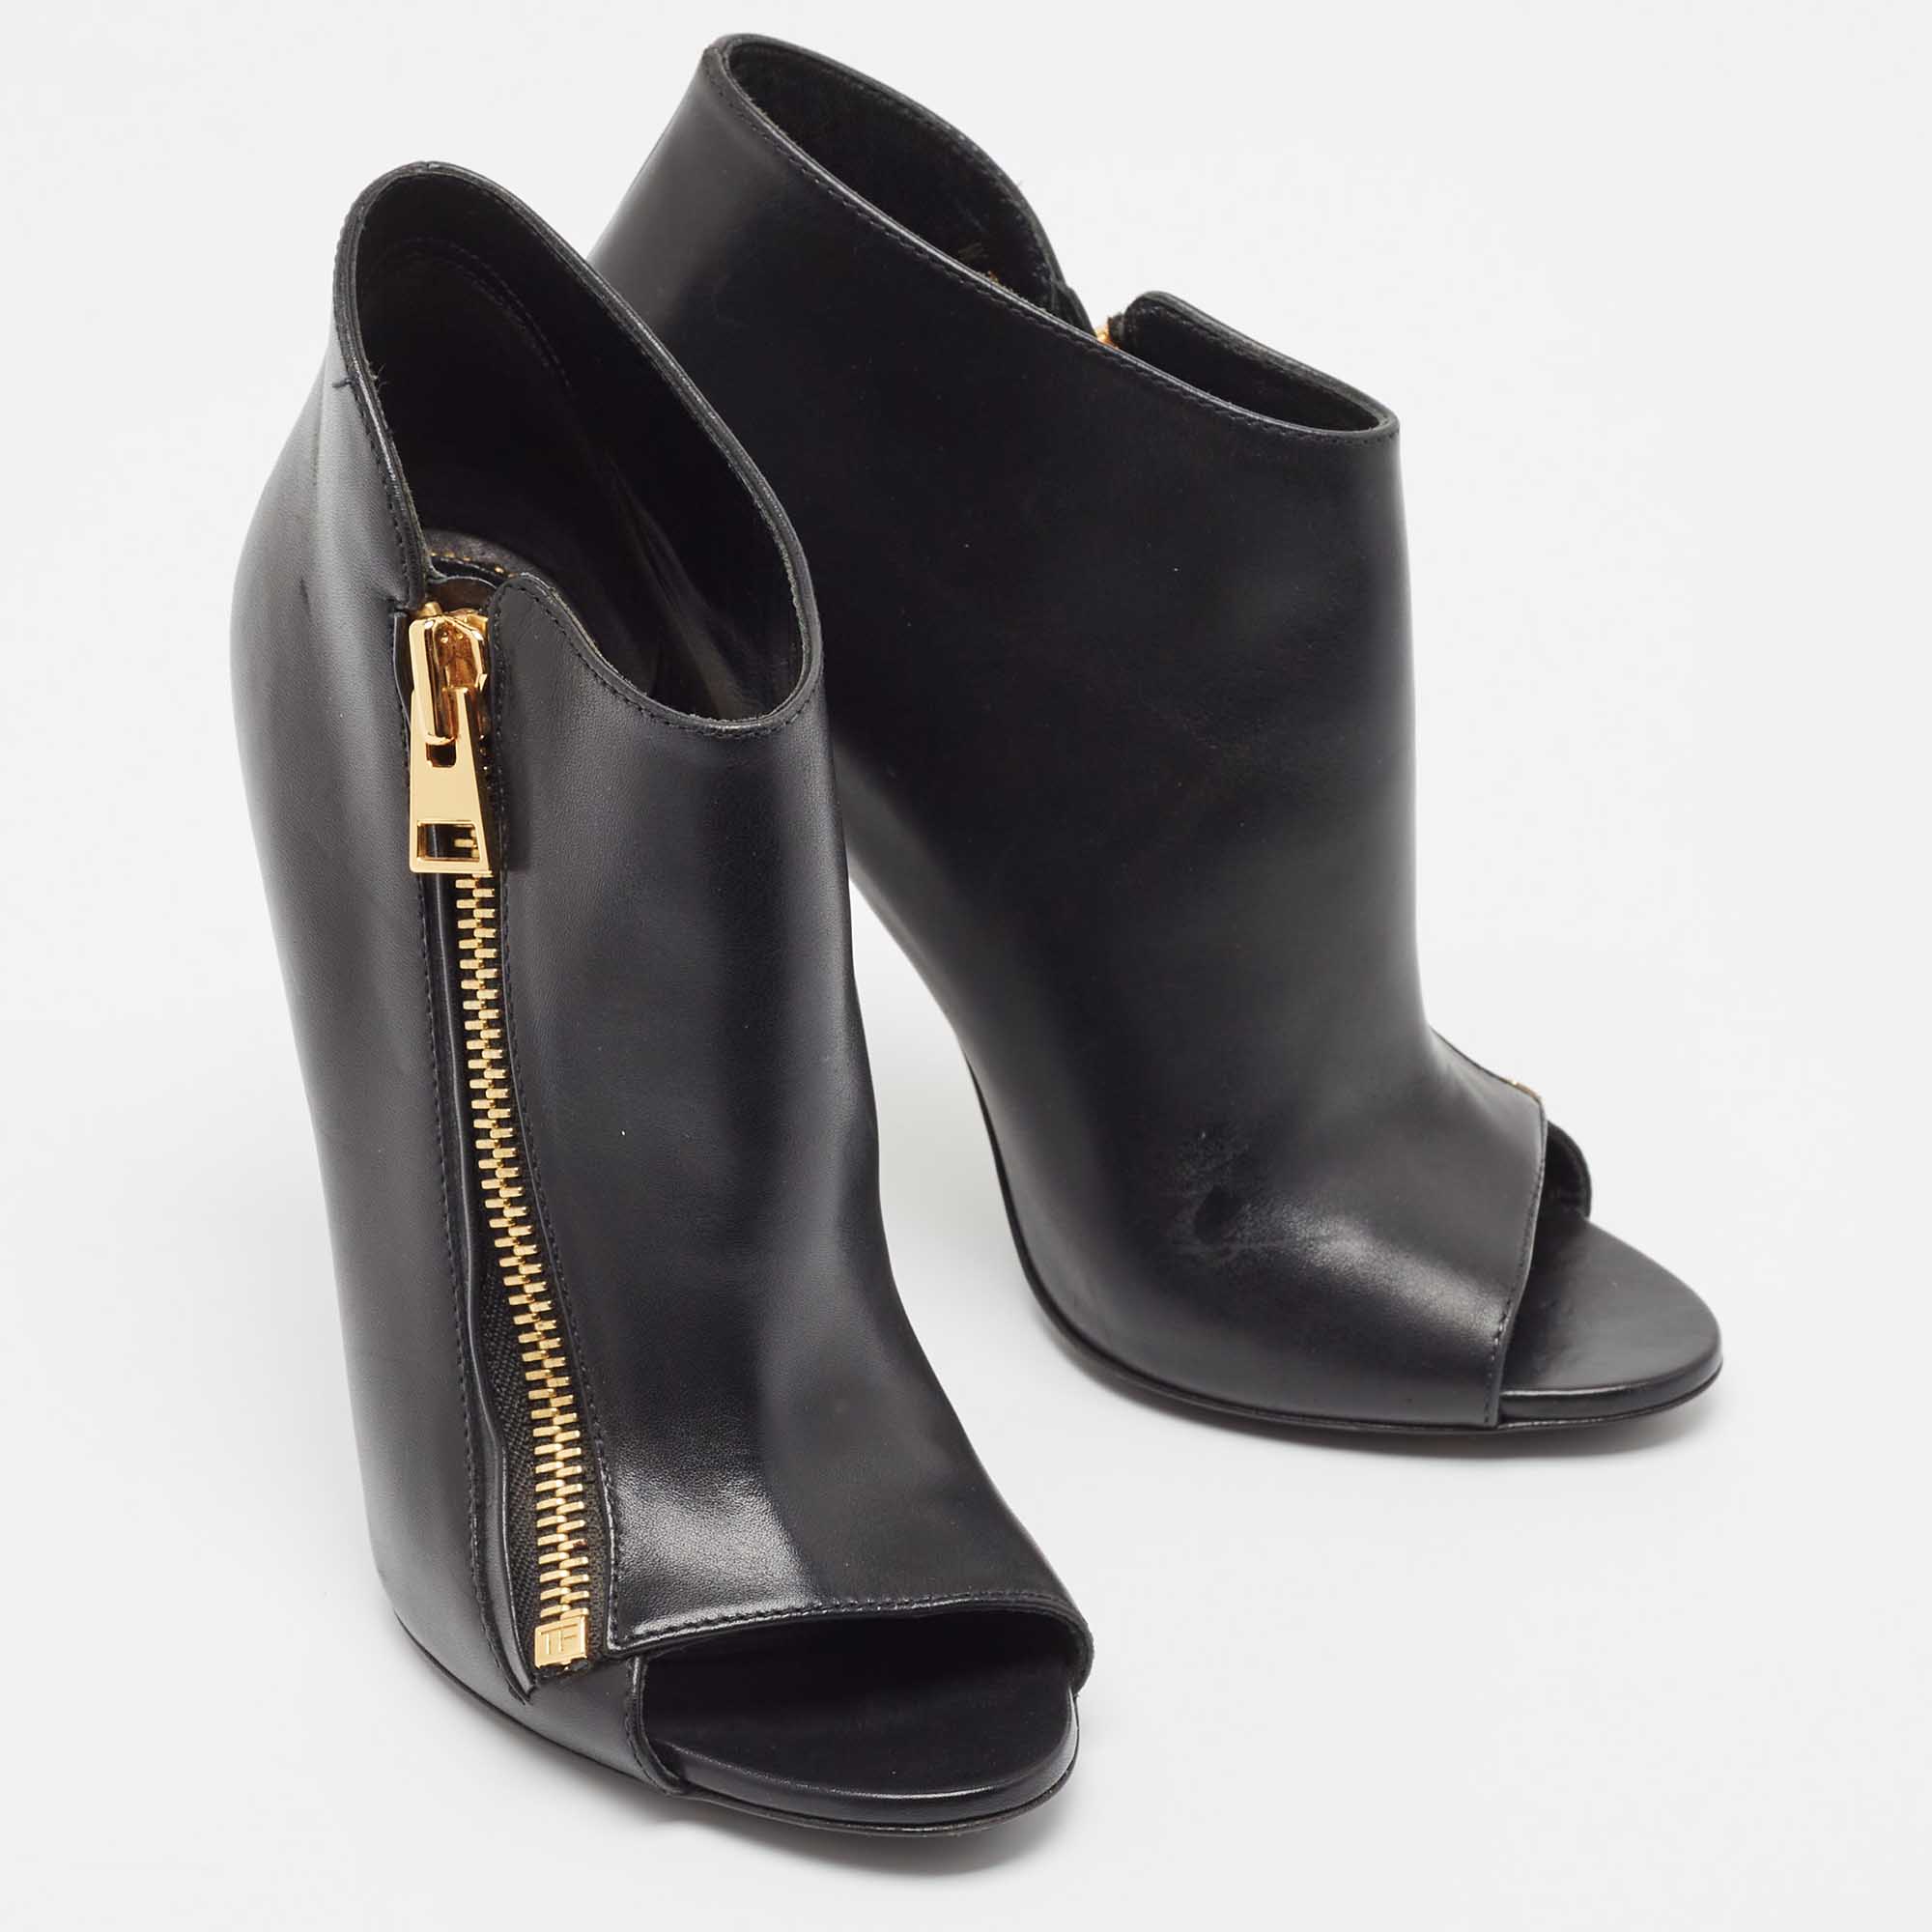 Tom Ford Black Leather Zip Up Ankle Boots Size 38.5